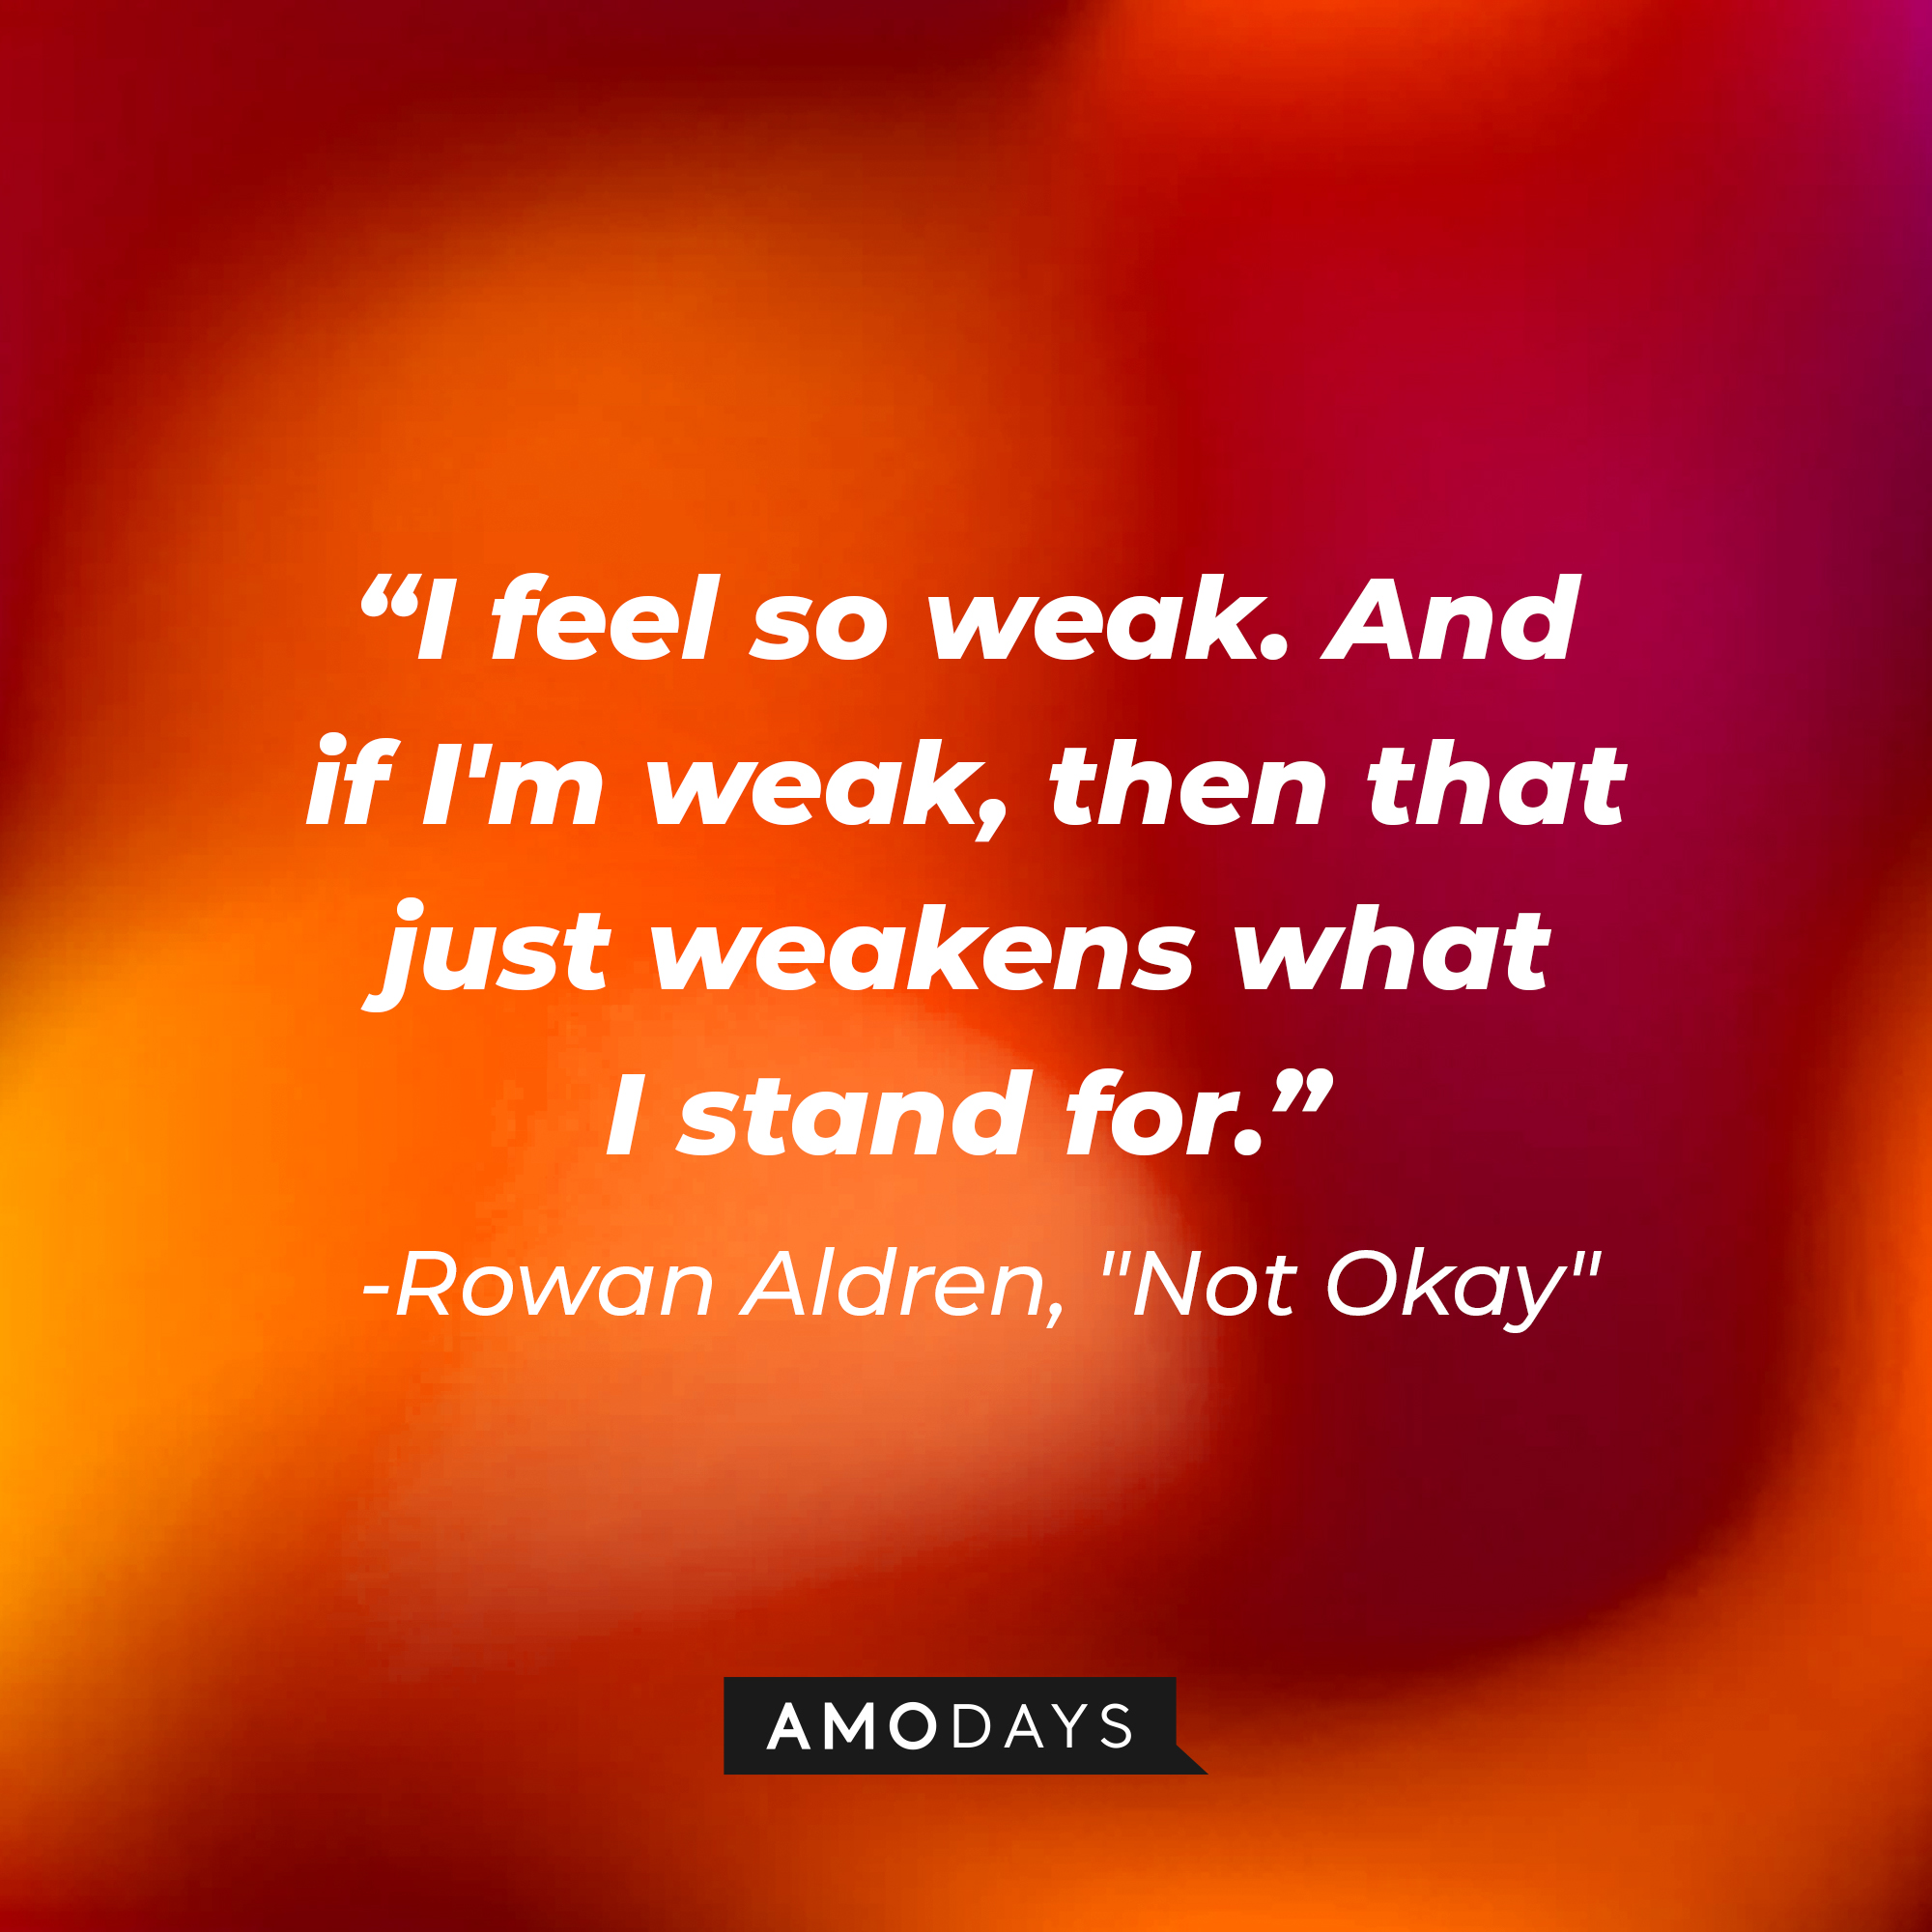 Rowan Aldren's quote: "I feel so weak. And if I'm weak, then that just weakens what I stand for." | Source: AmoDays